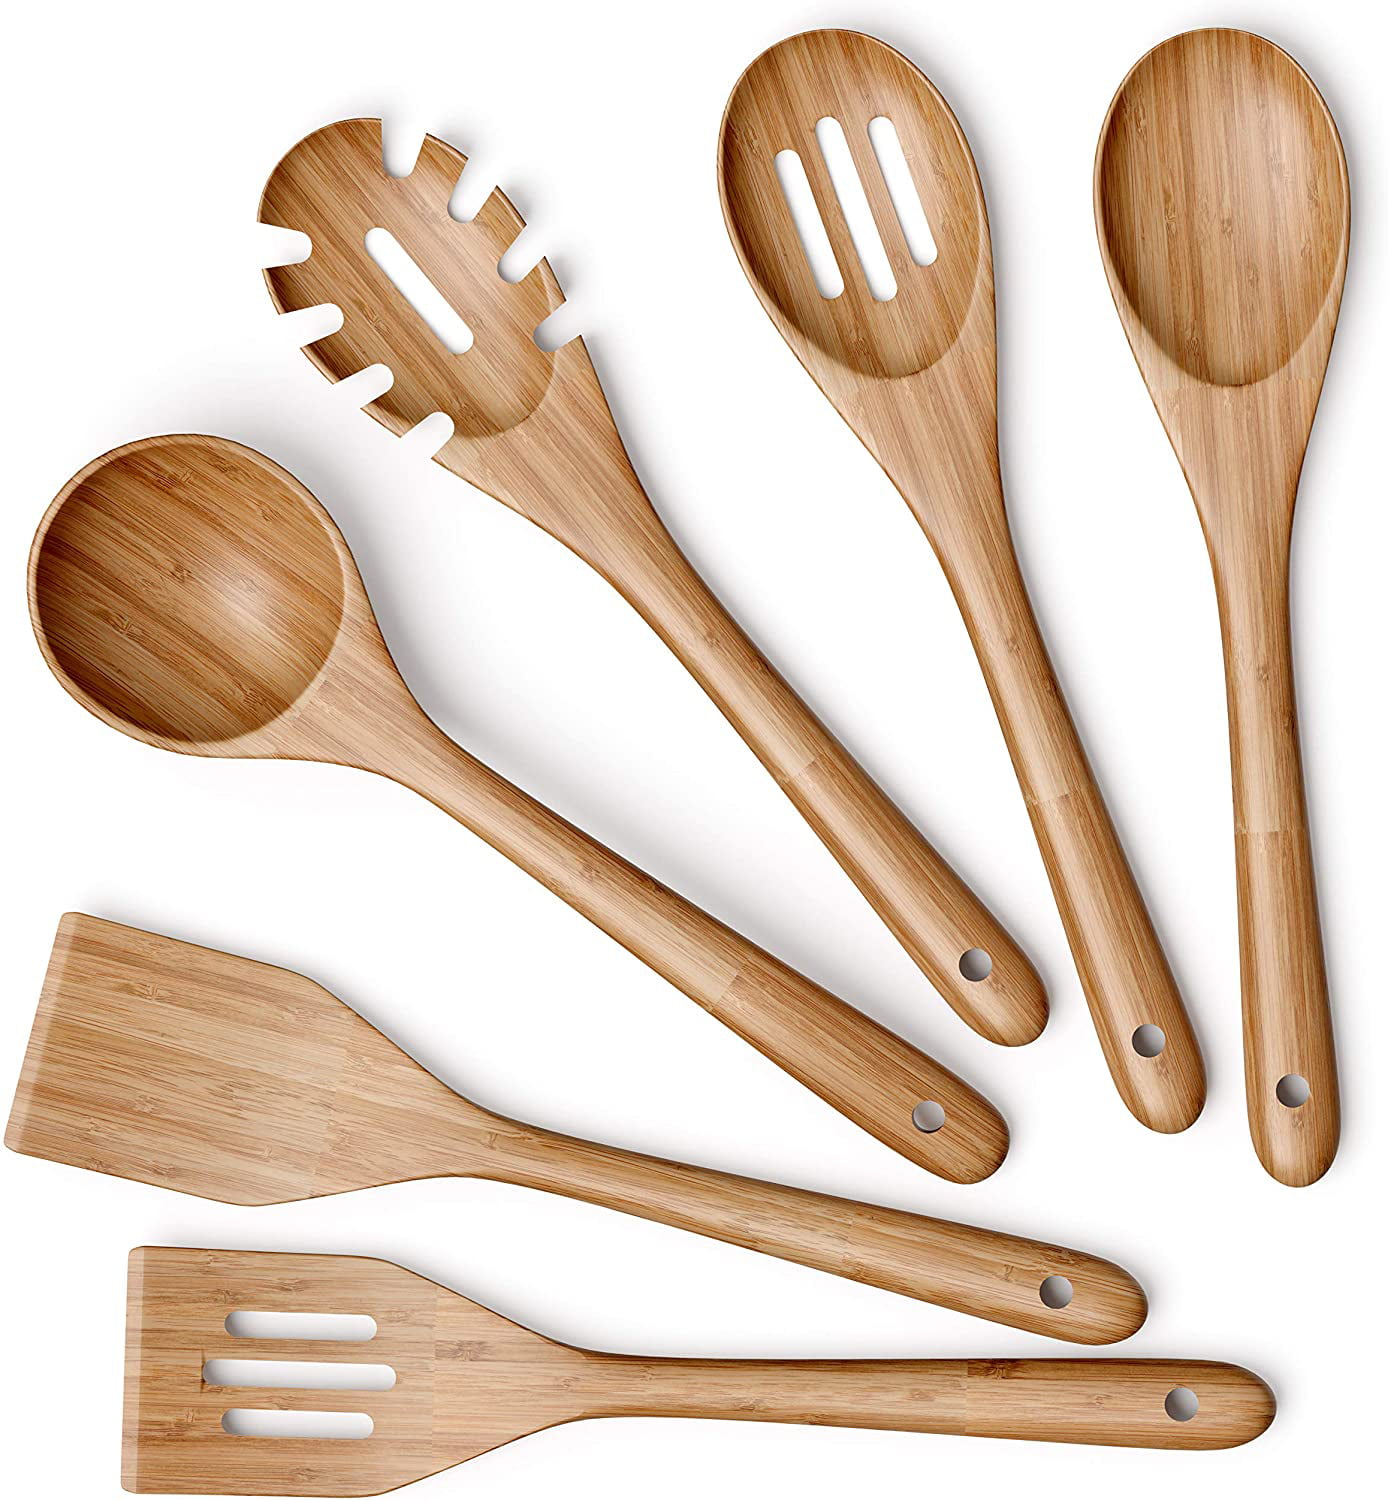 6pc/set 7” HAND CRAFT WORK TEAK WOODEN FORK AND SPOON SALAD TONG RARE 